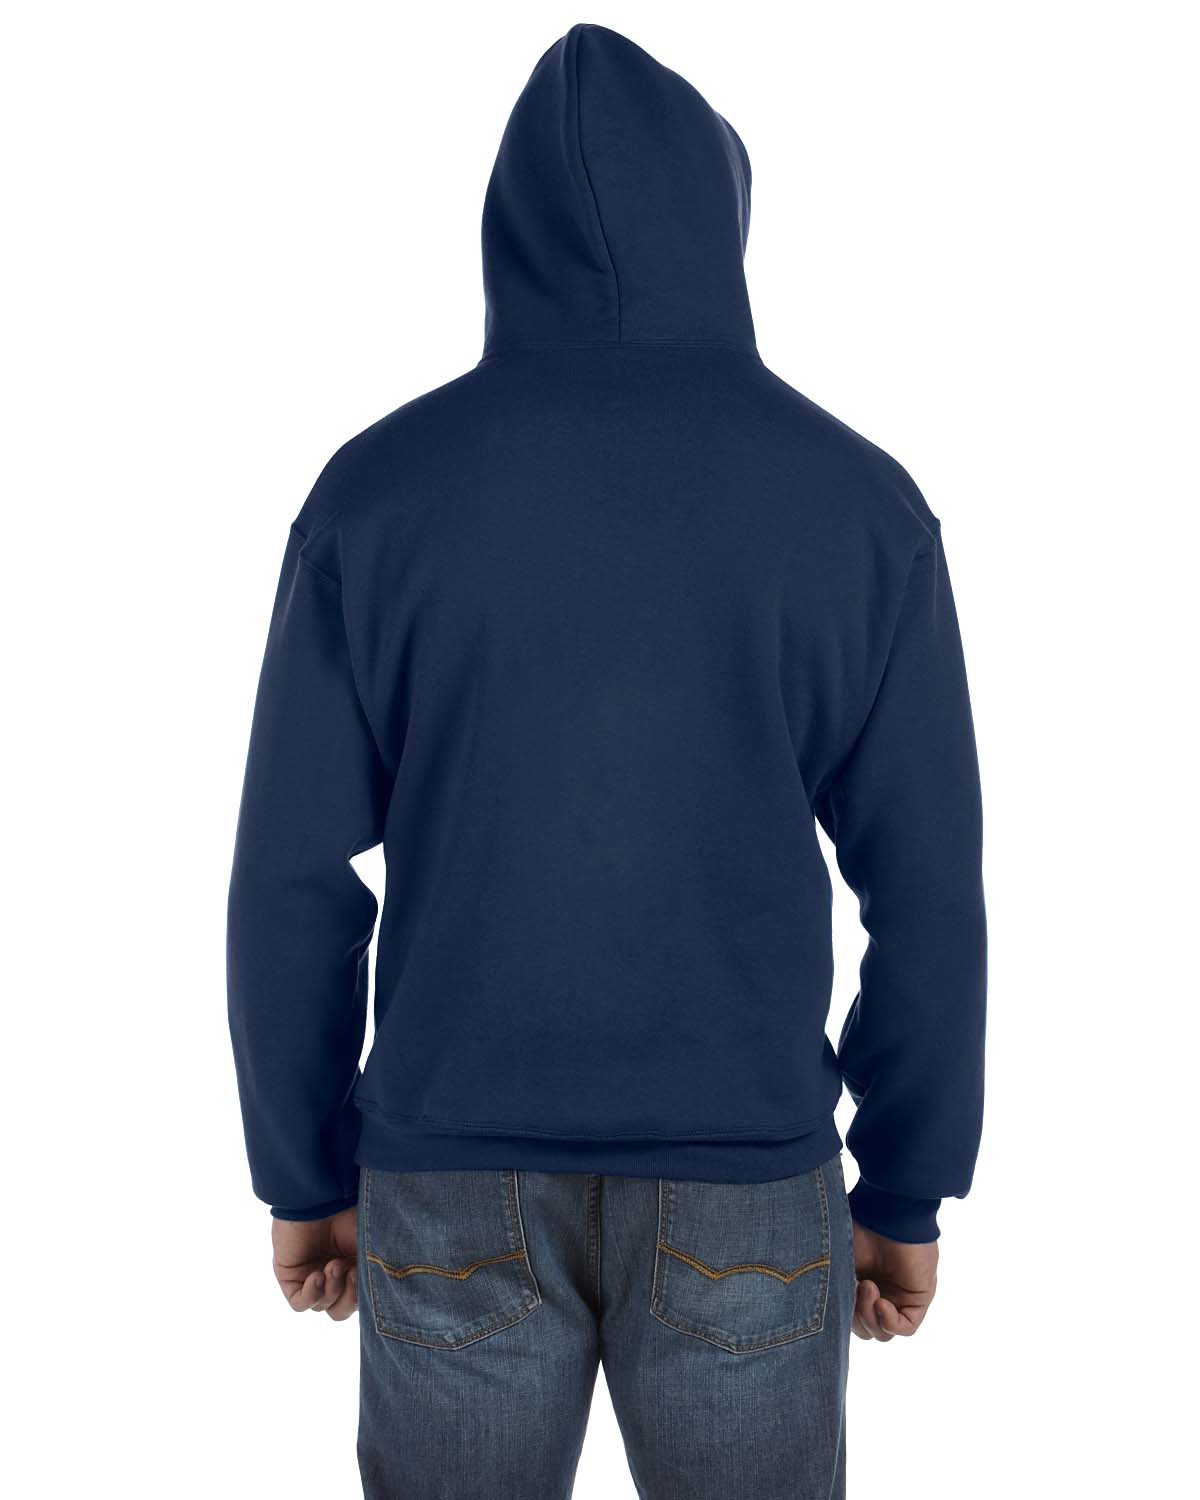 'Fruit of the Loom 82130 Adult Supercotton Pullover Hood'